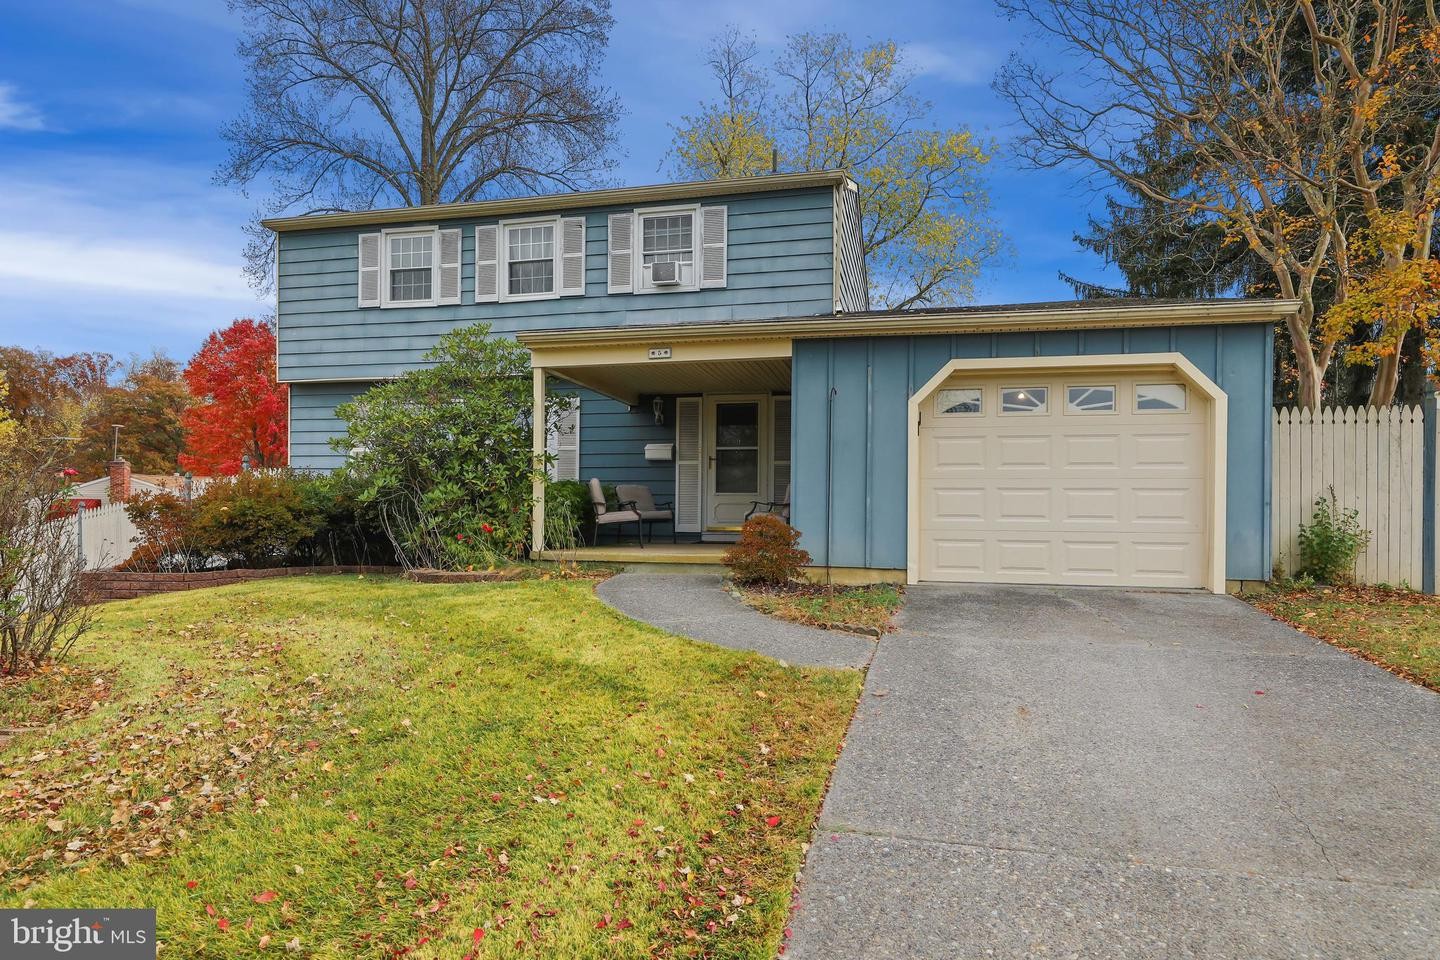 2. 5 Colonial Ct